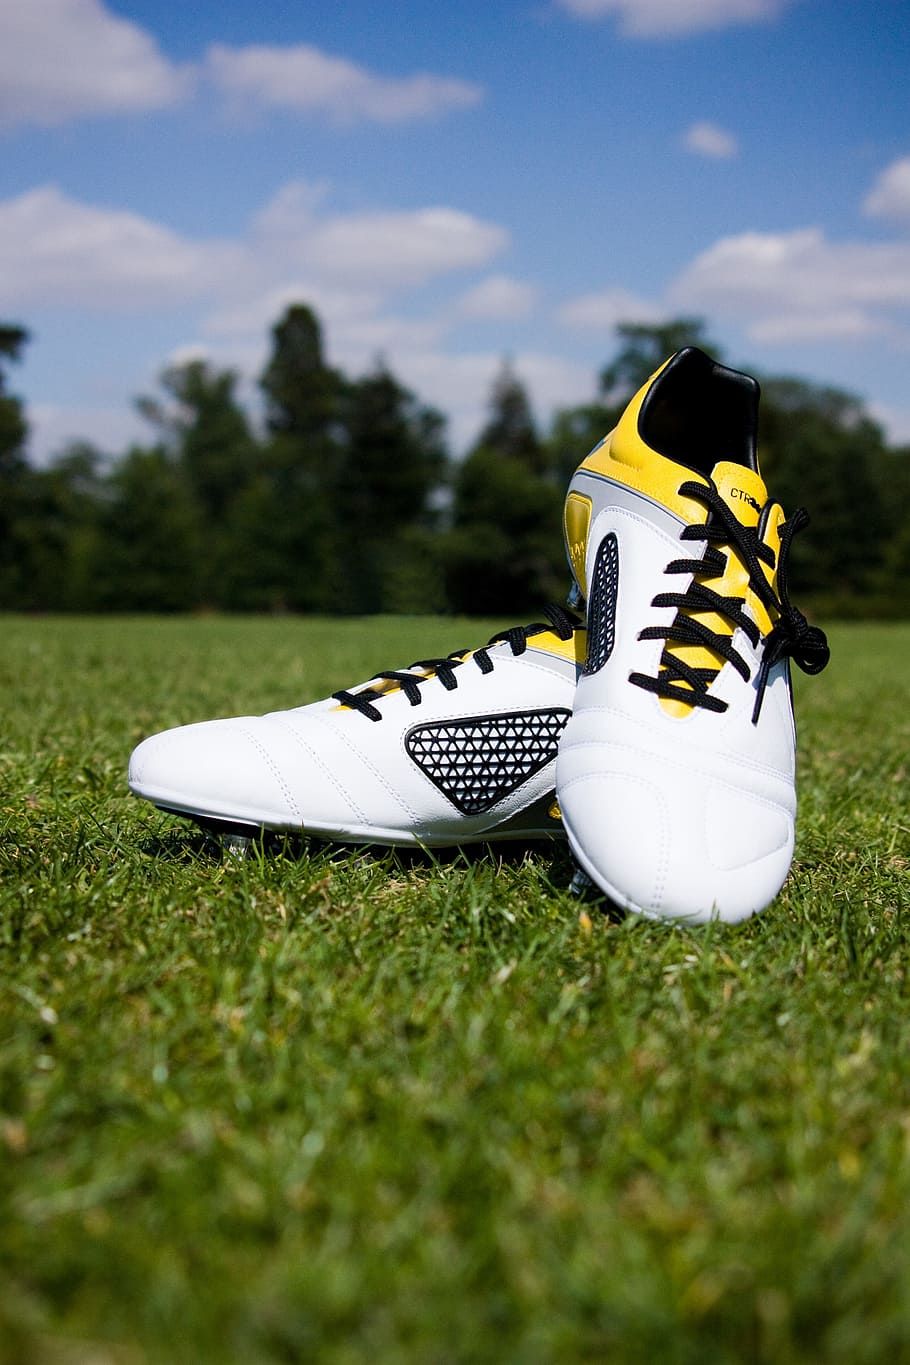 Pair Of White And Yellow Cleats On Green Grass, Football, - Football Ground Images Hd Download - HD Wallpaper 